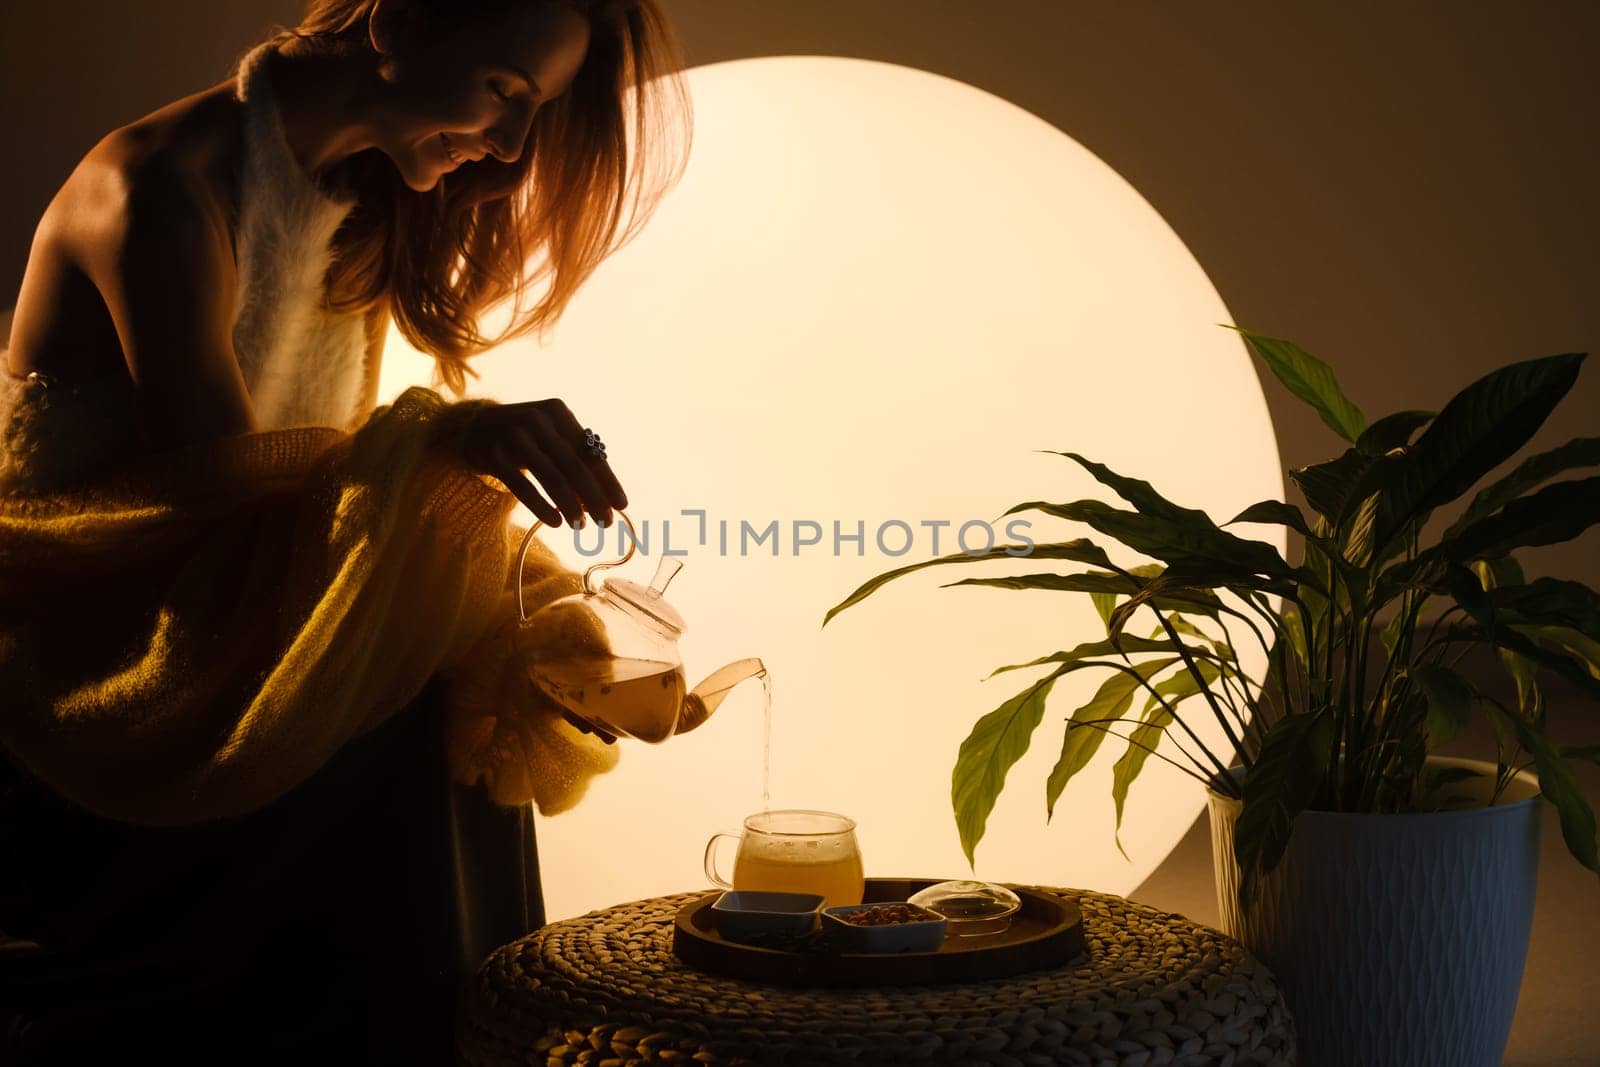 A young girl conducts an evening tea drinking procedure indoors. Relaxing tea party.